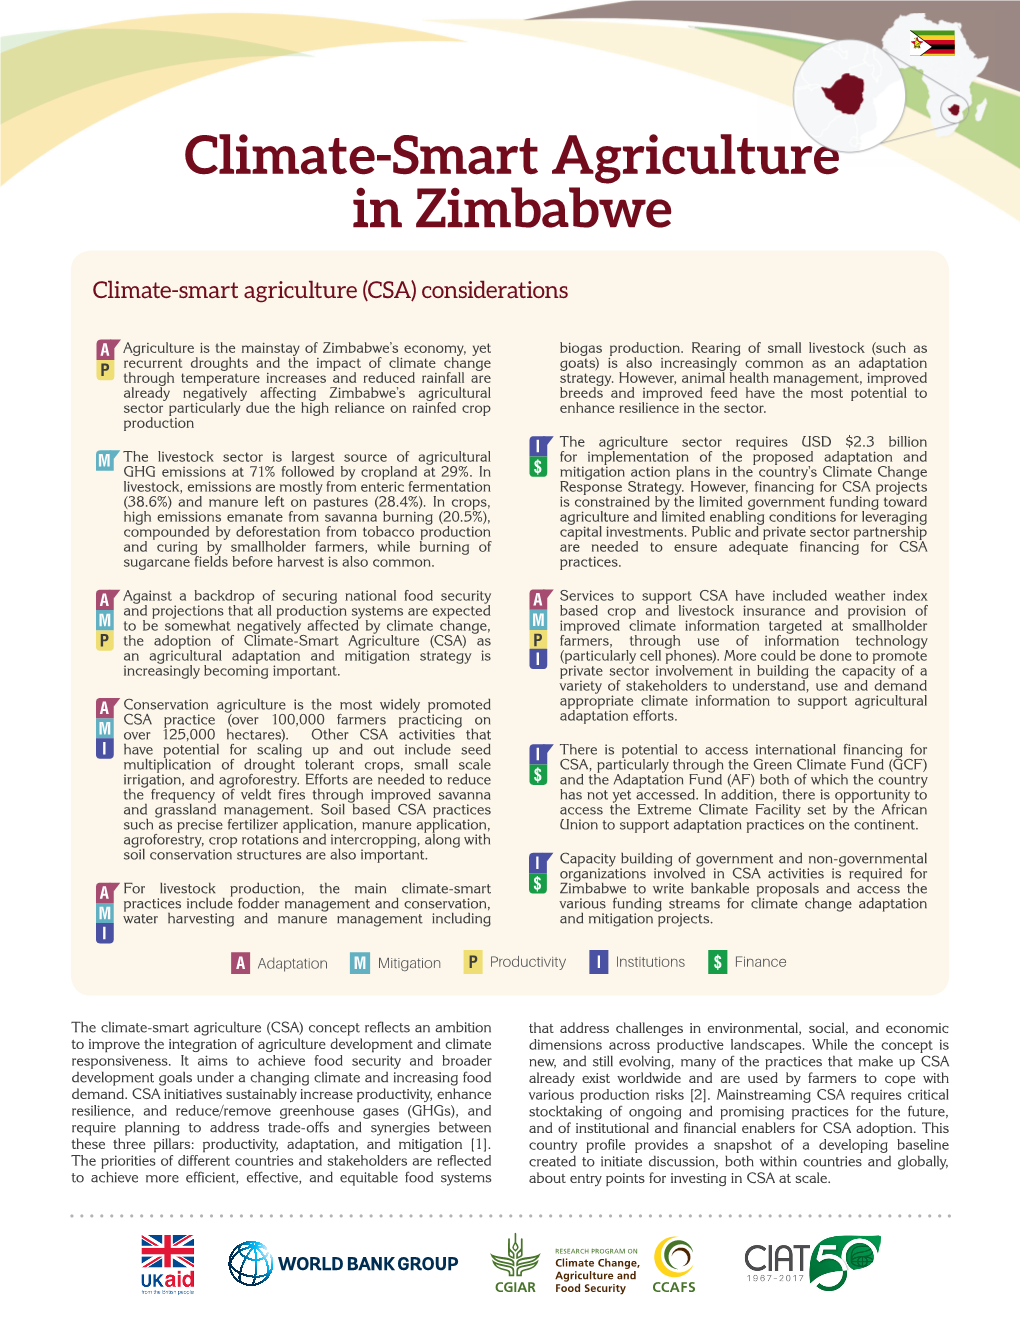 Climate-Smart Agriculture in Zimbabwe